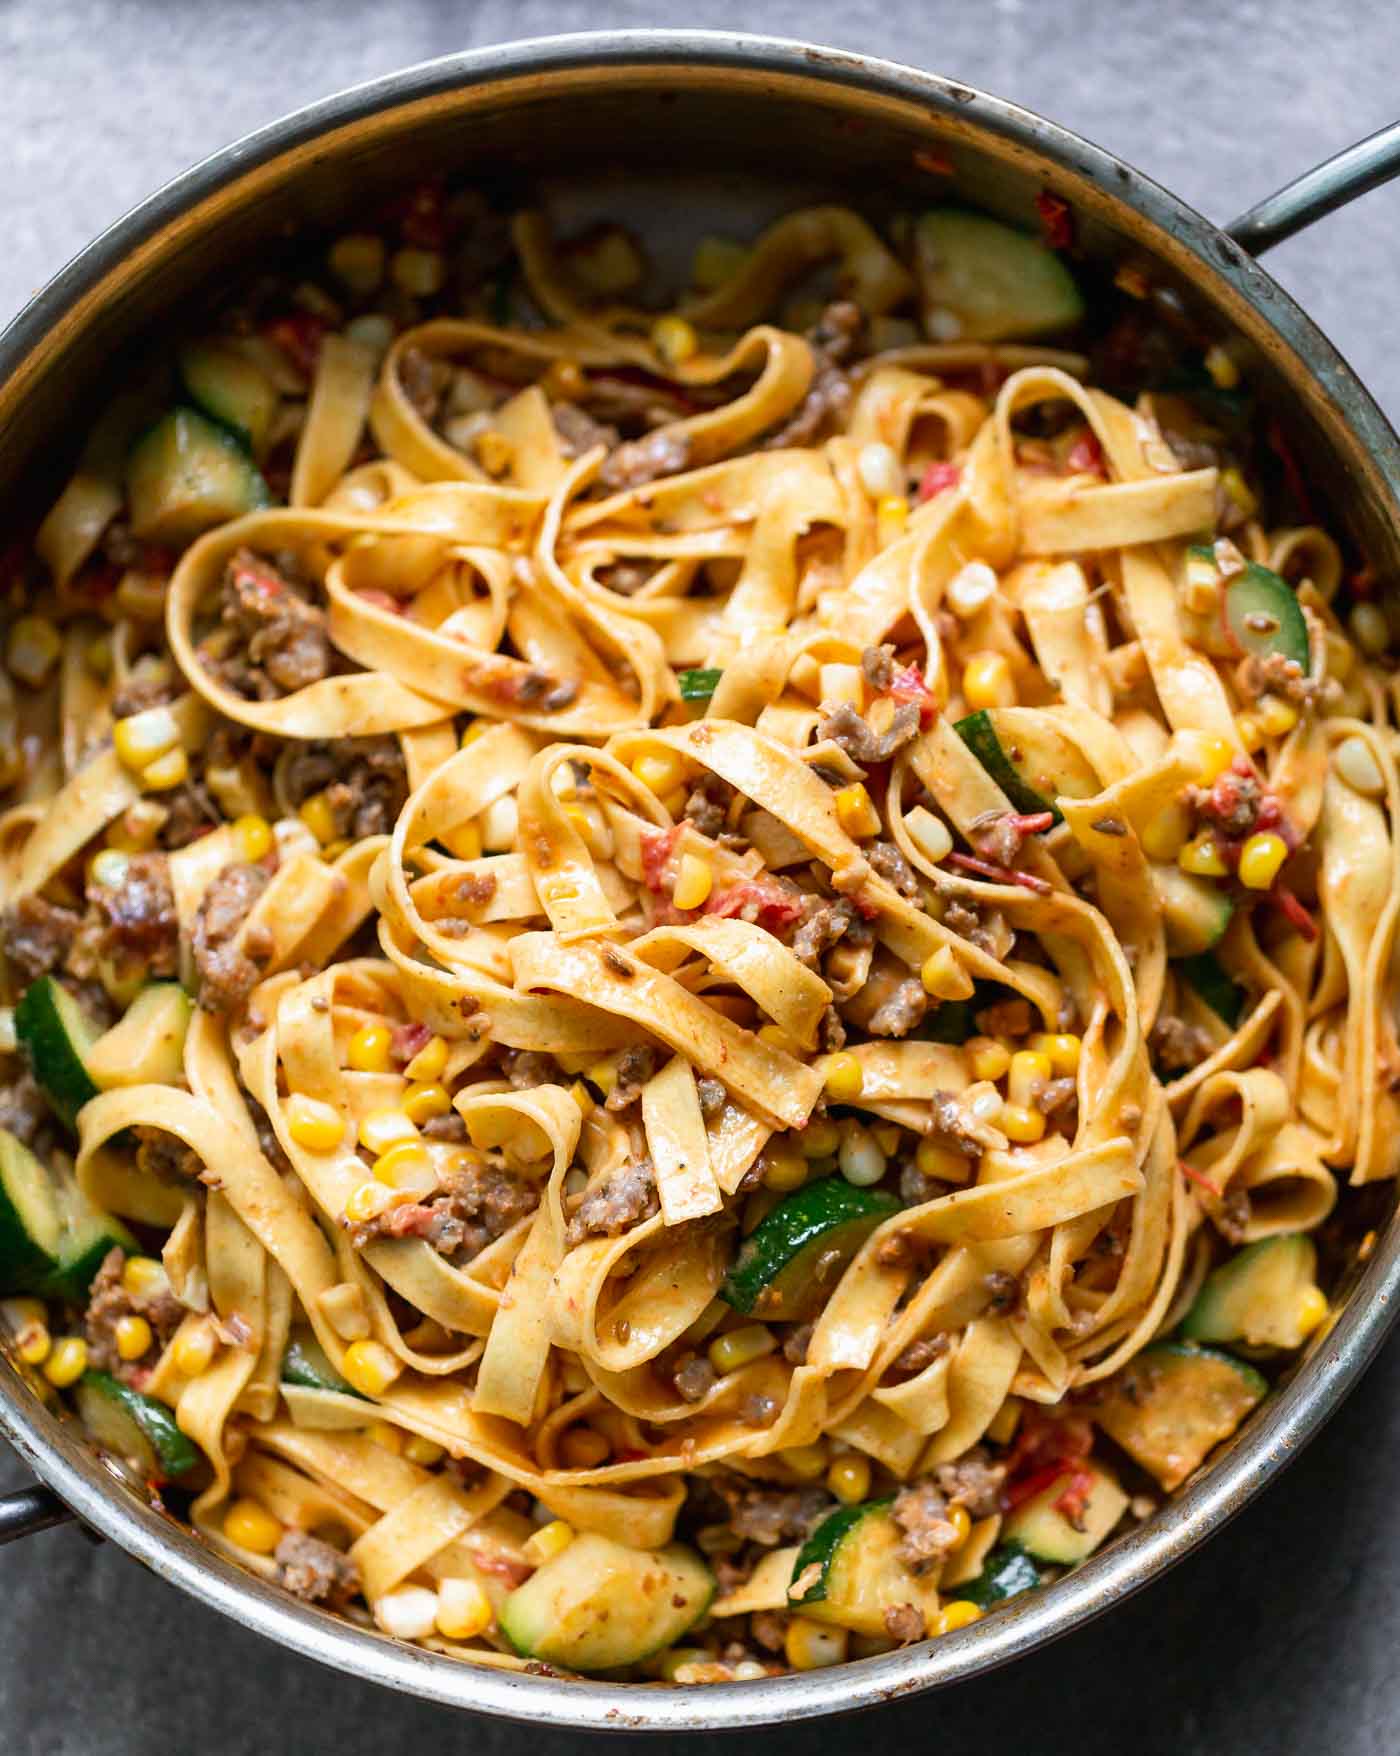 Summer Pasta with Brown Butter Tomato Sauce